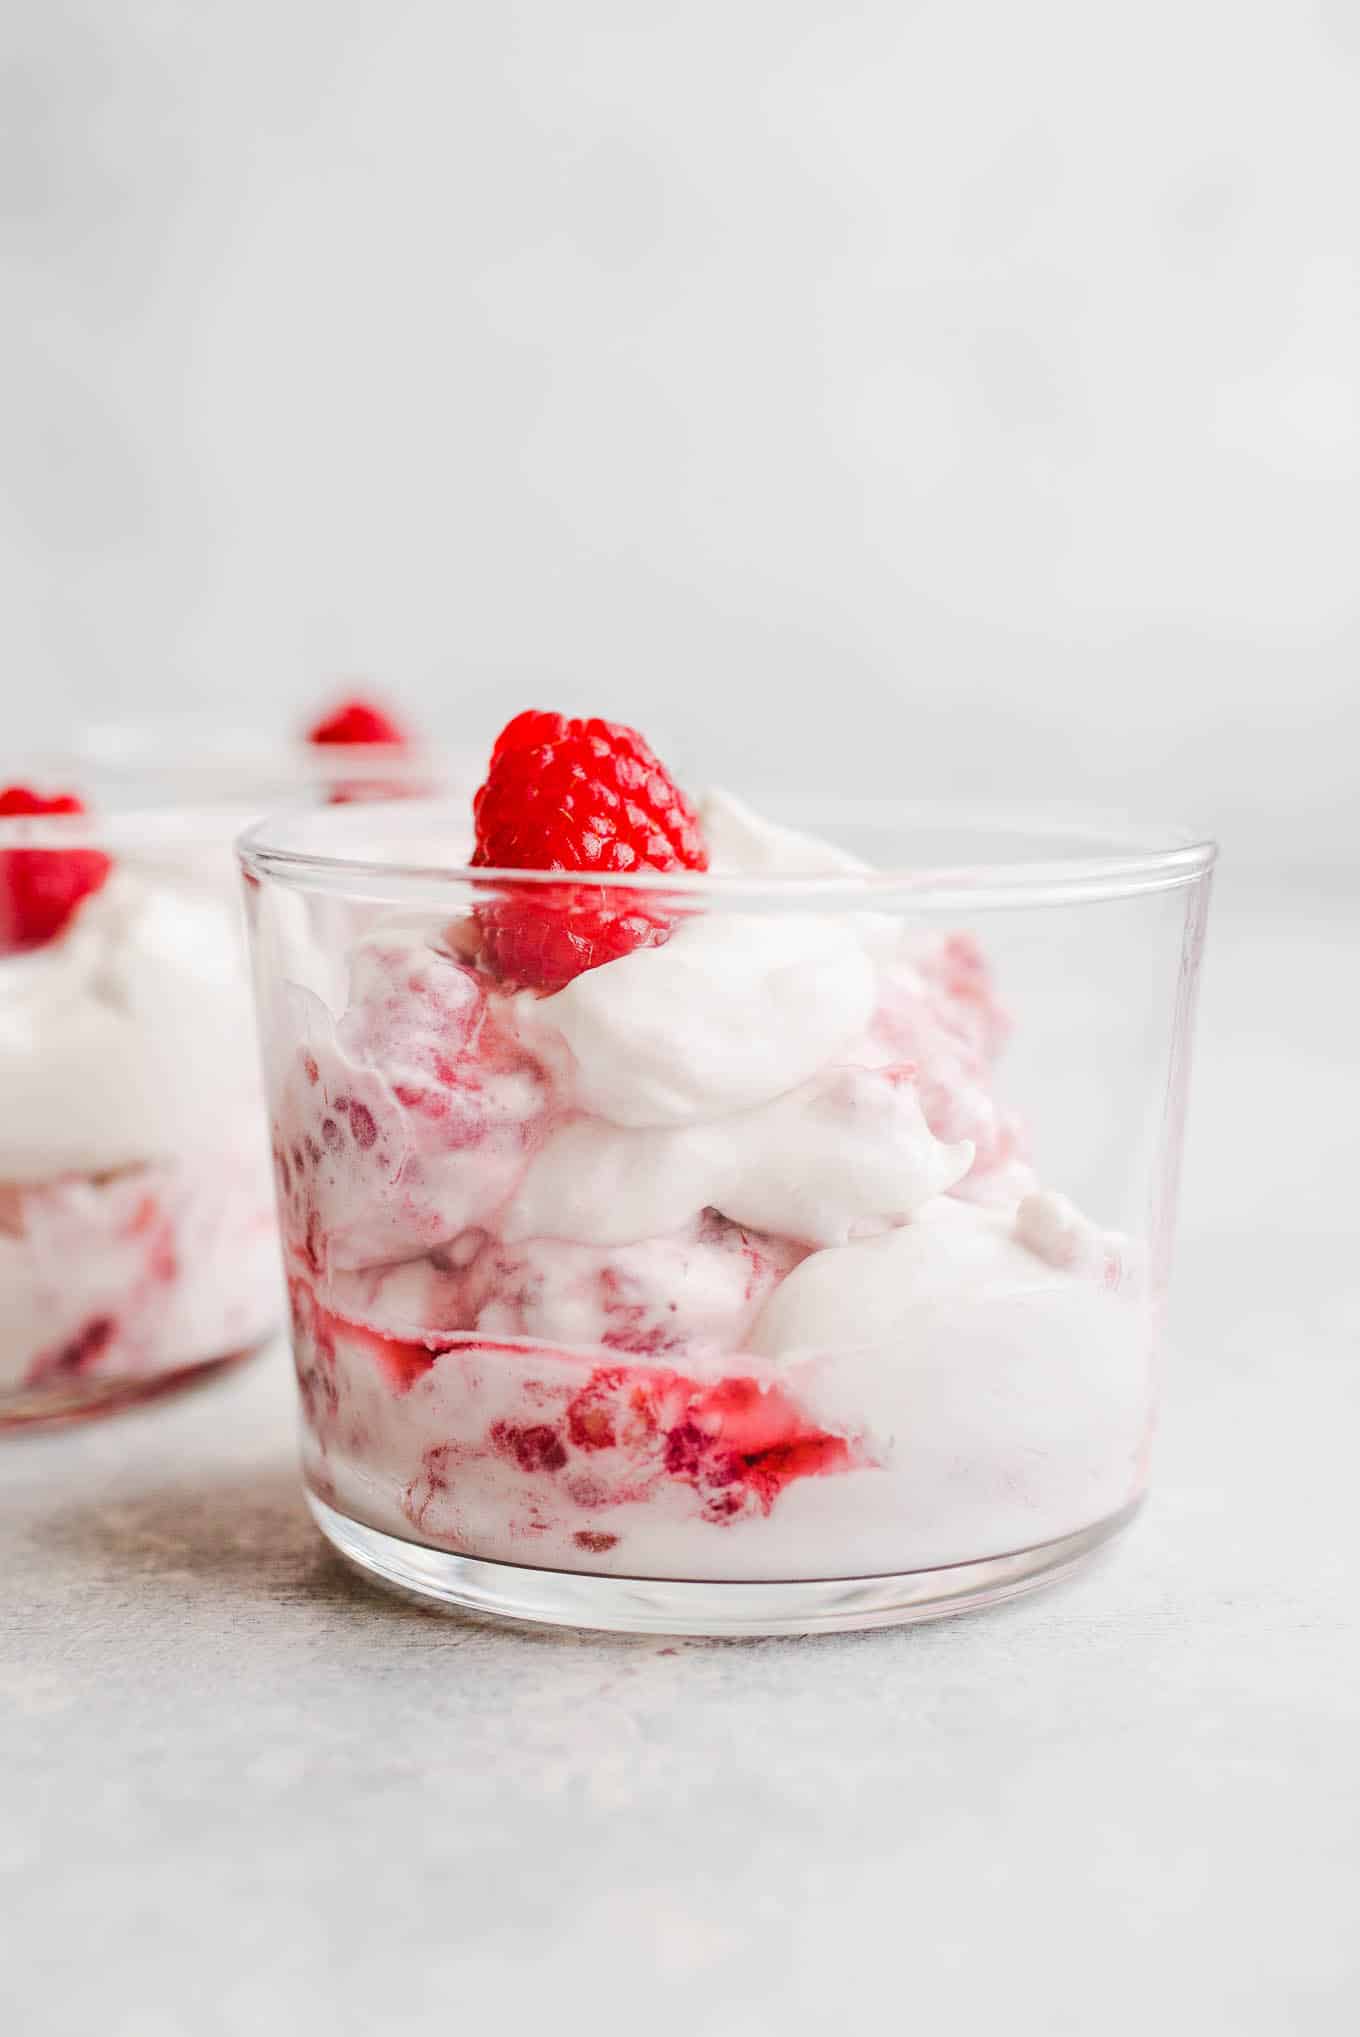 Whipped cream and raspberries in a glass.